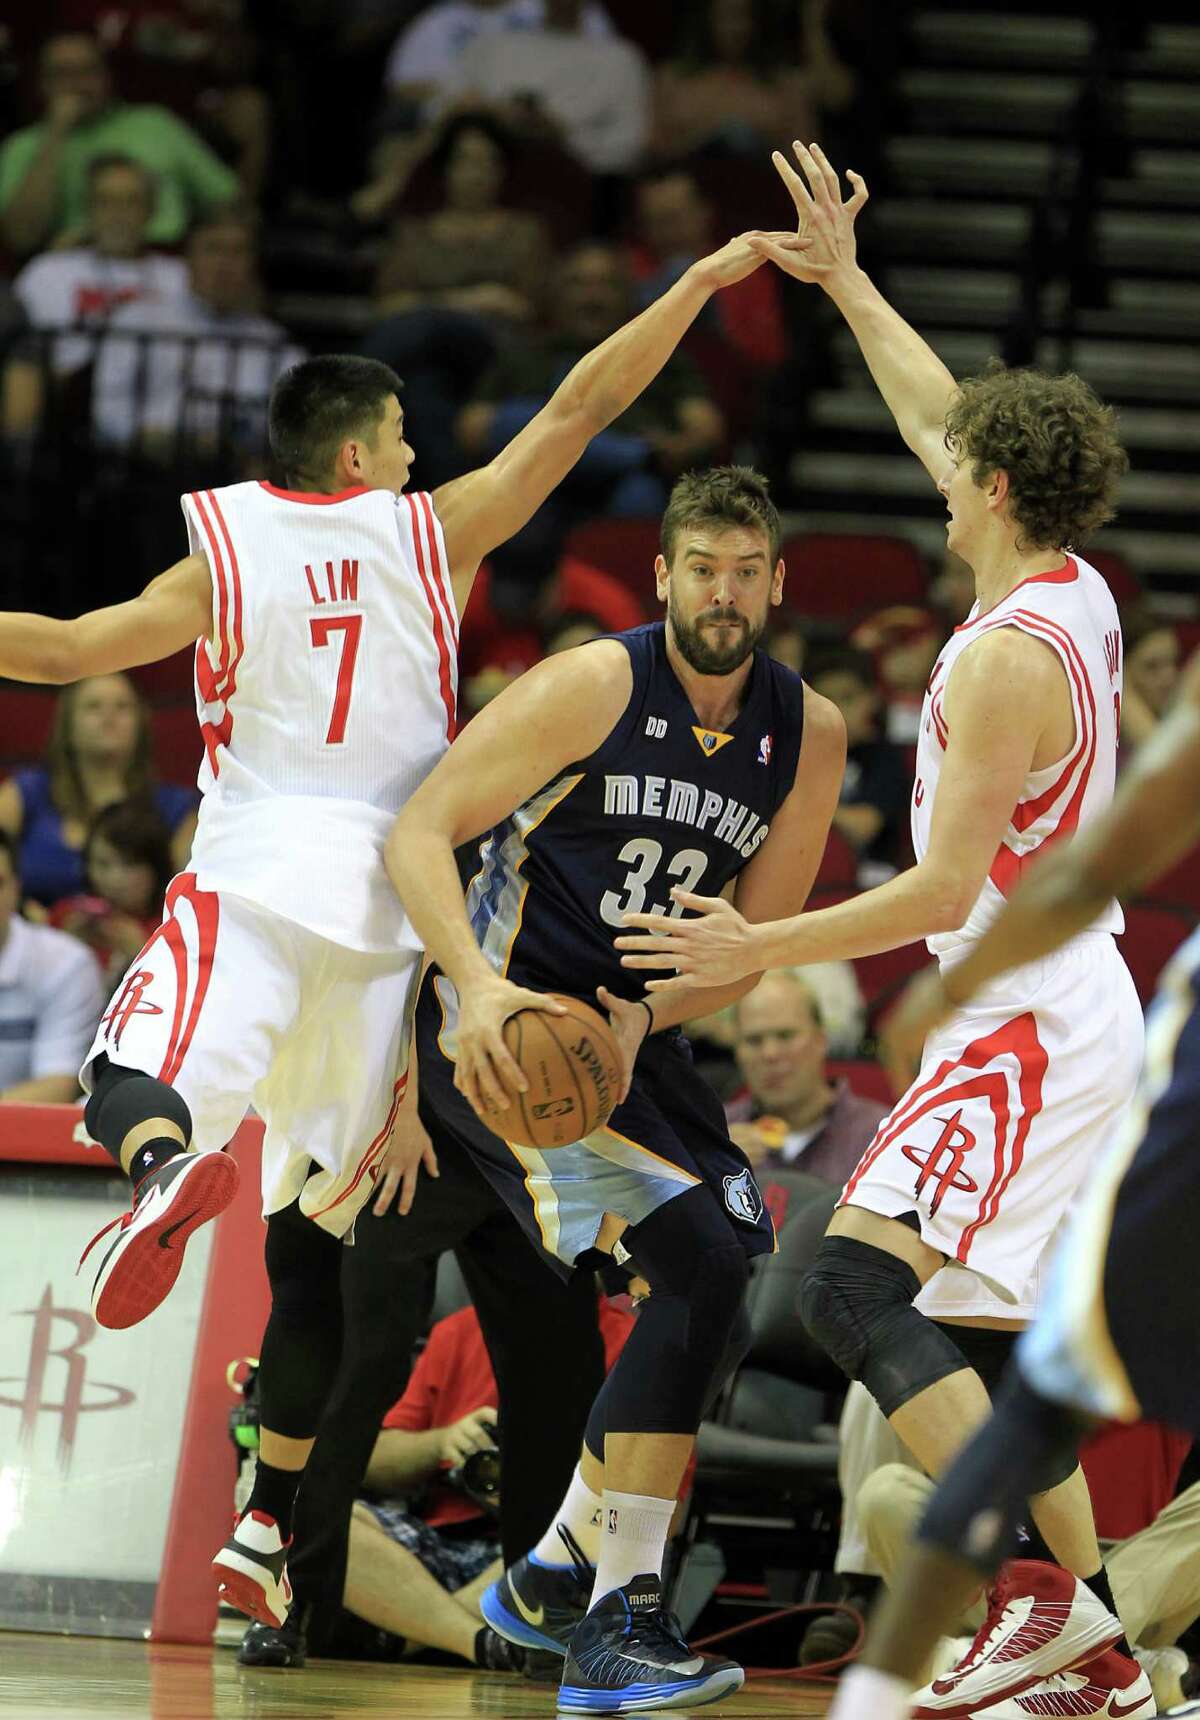 It's not ballet; it's defense the Rockets' Jeremy Lin, left, and Omer Asik play on the Grizzlies' Marc Gasol. Coach Kevin McHale values such defense in the paint.